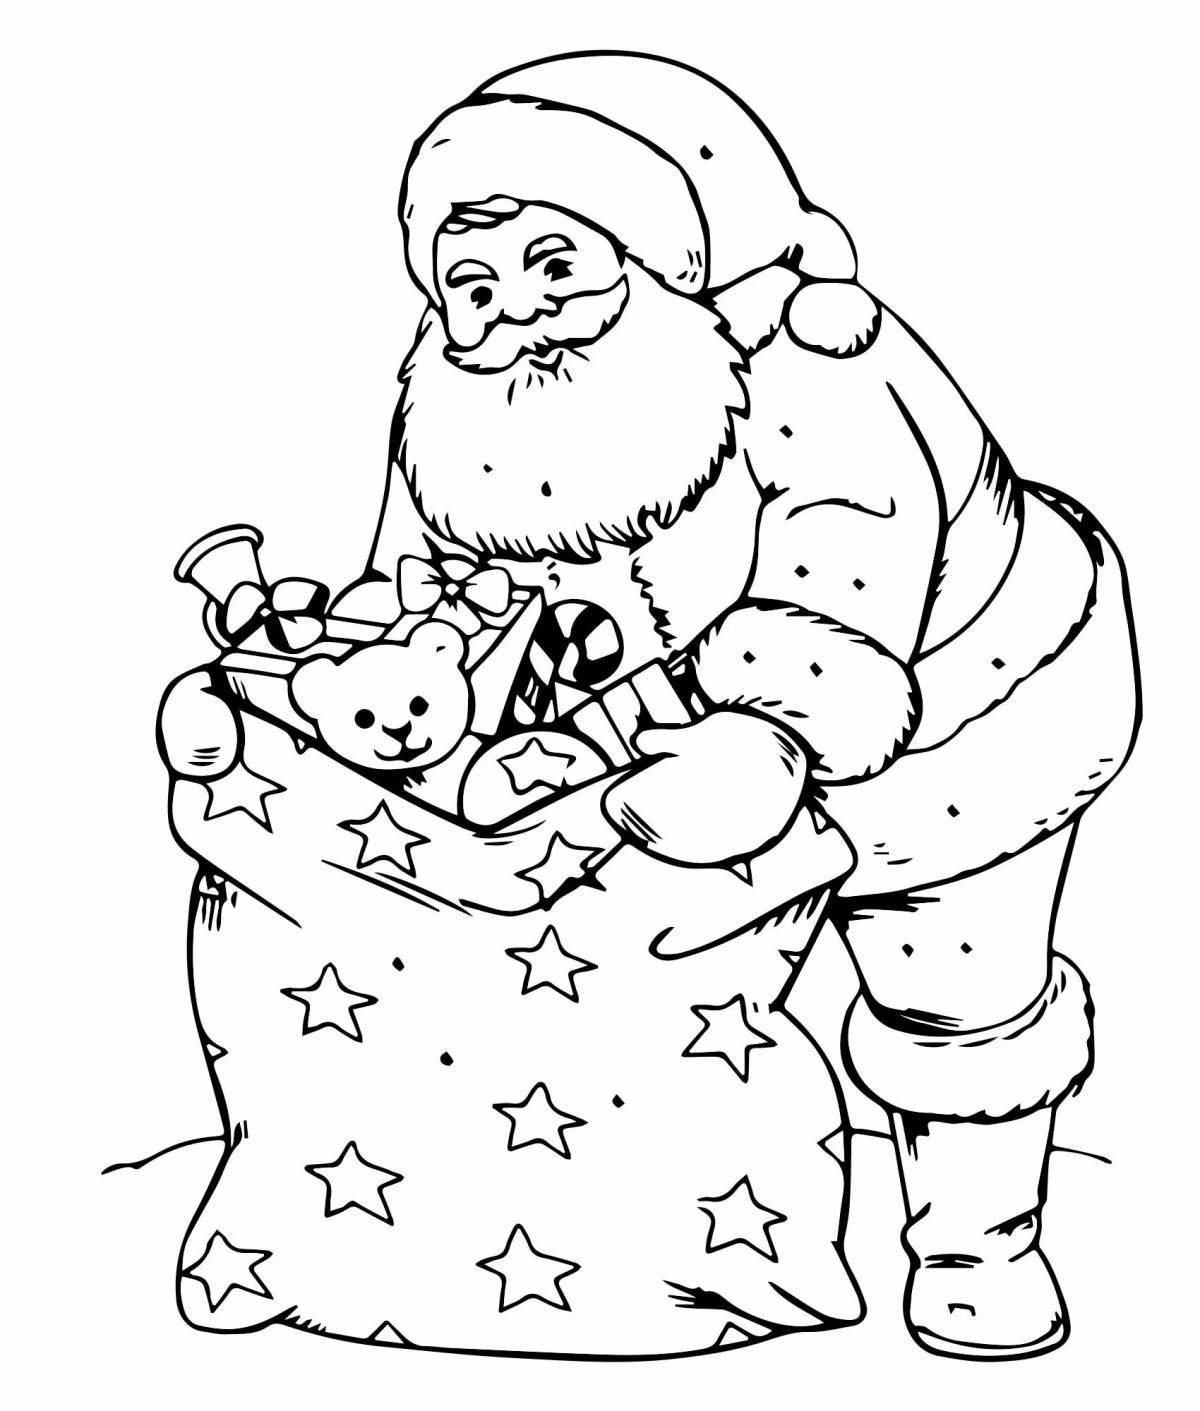 Great freezing coloring book